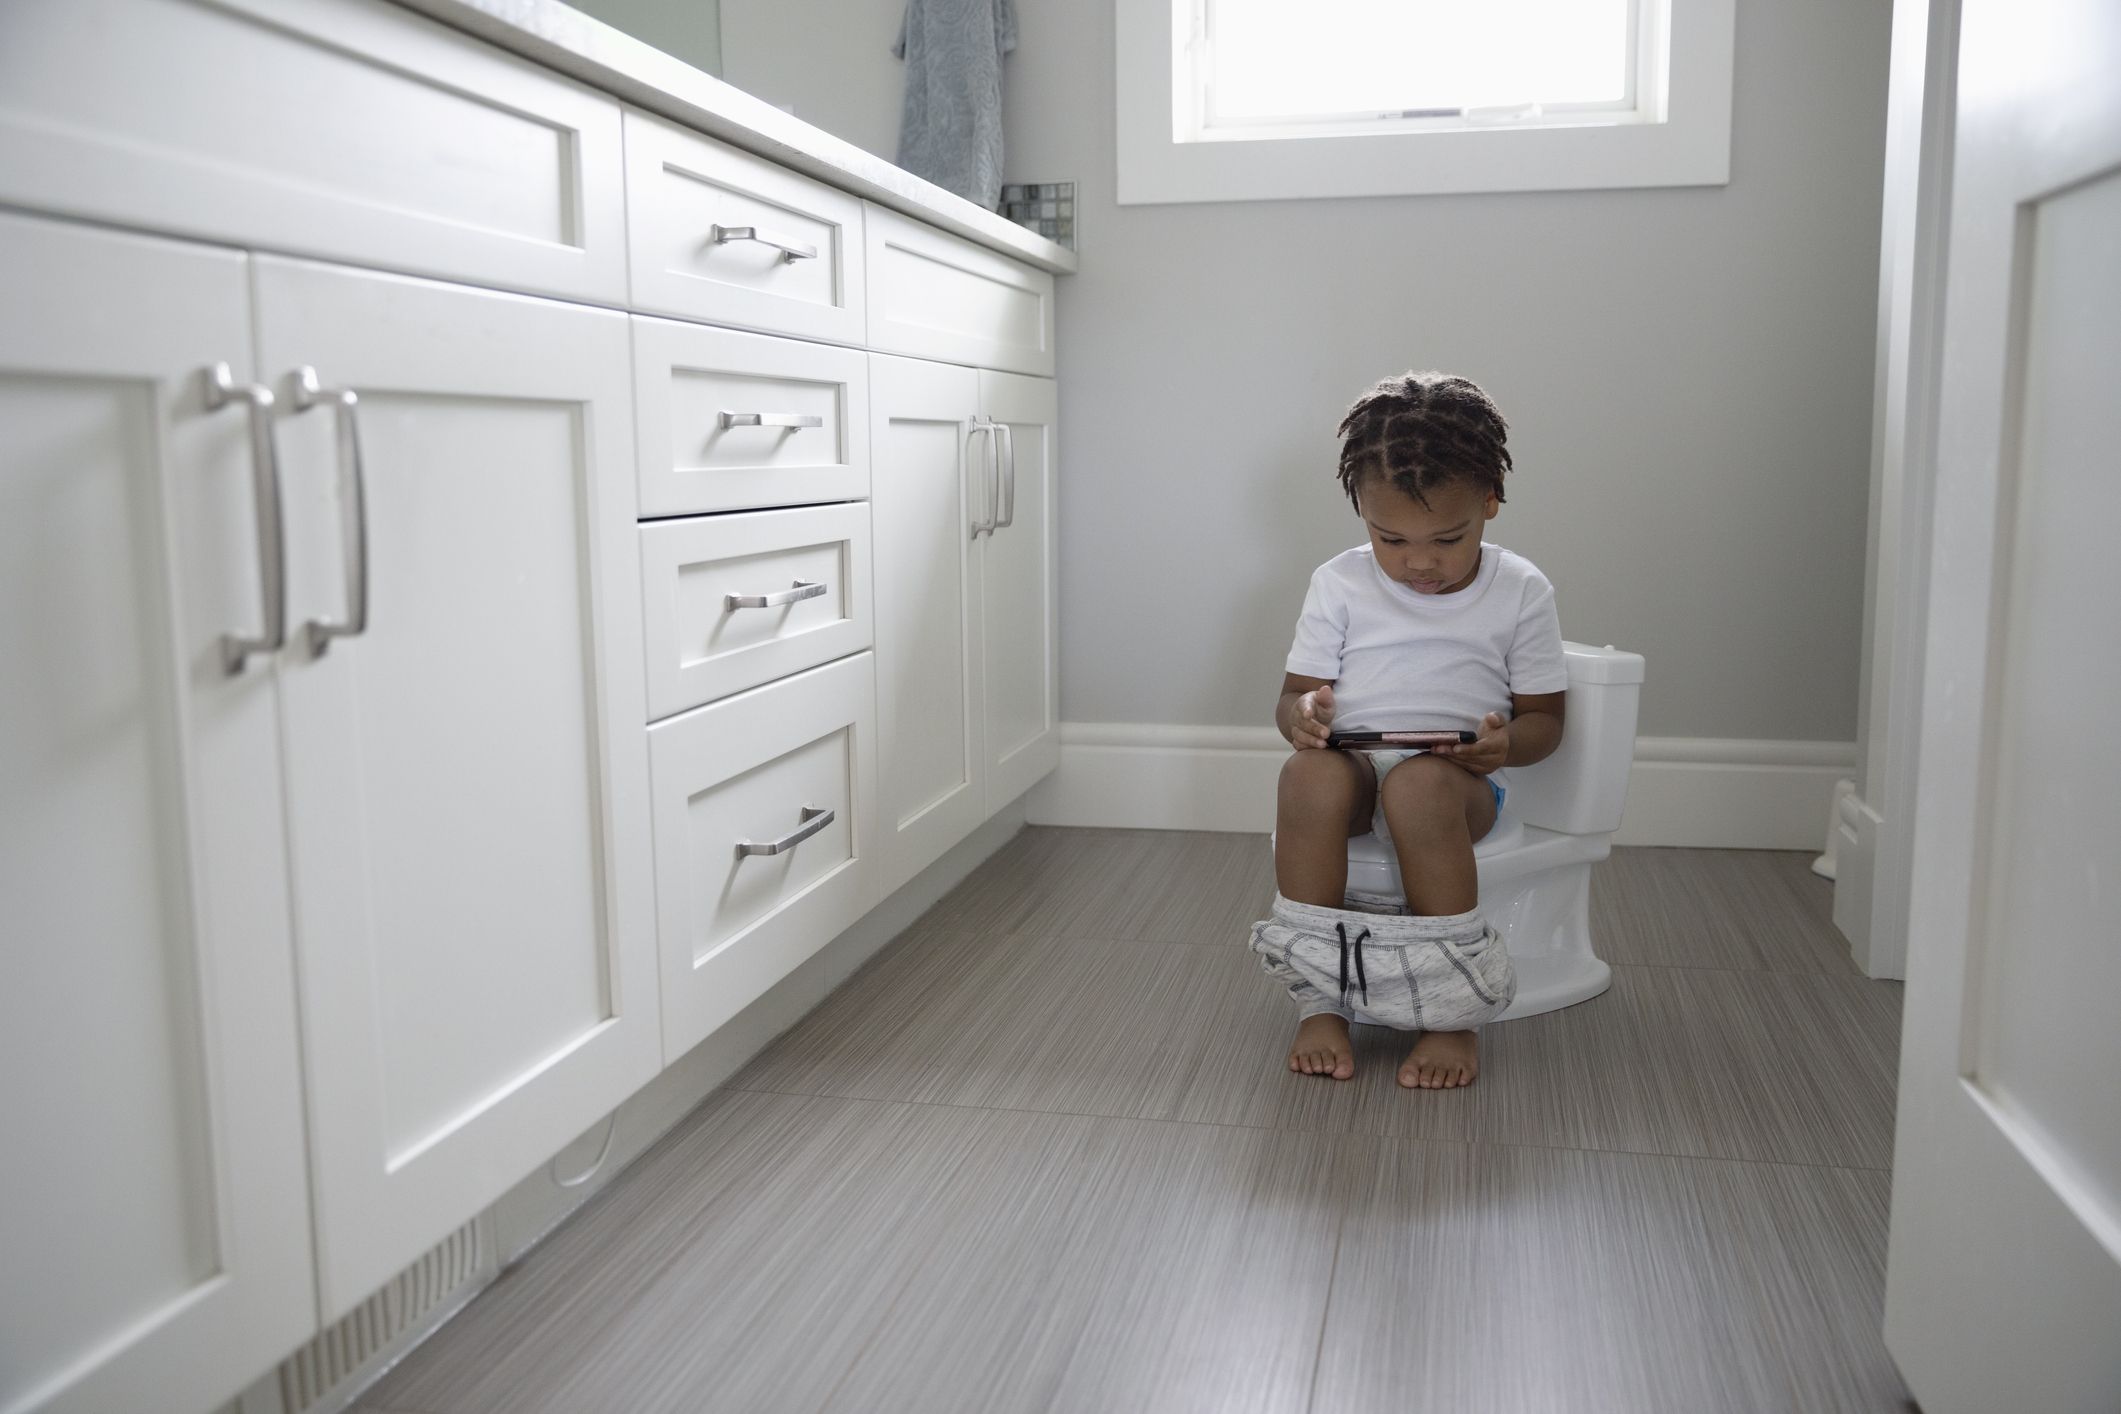 Best Potty Training Apps - Apps That Help With Toilet Training